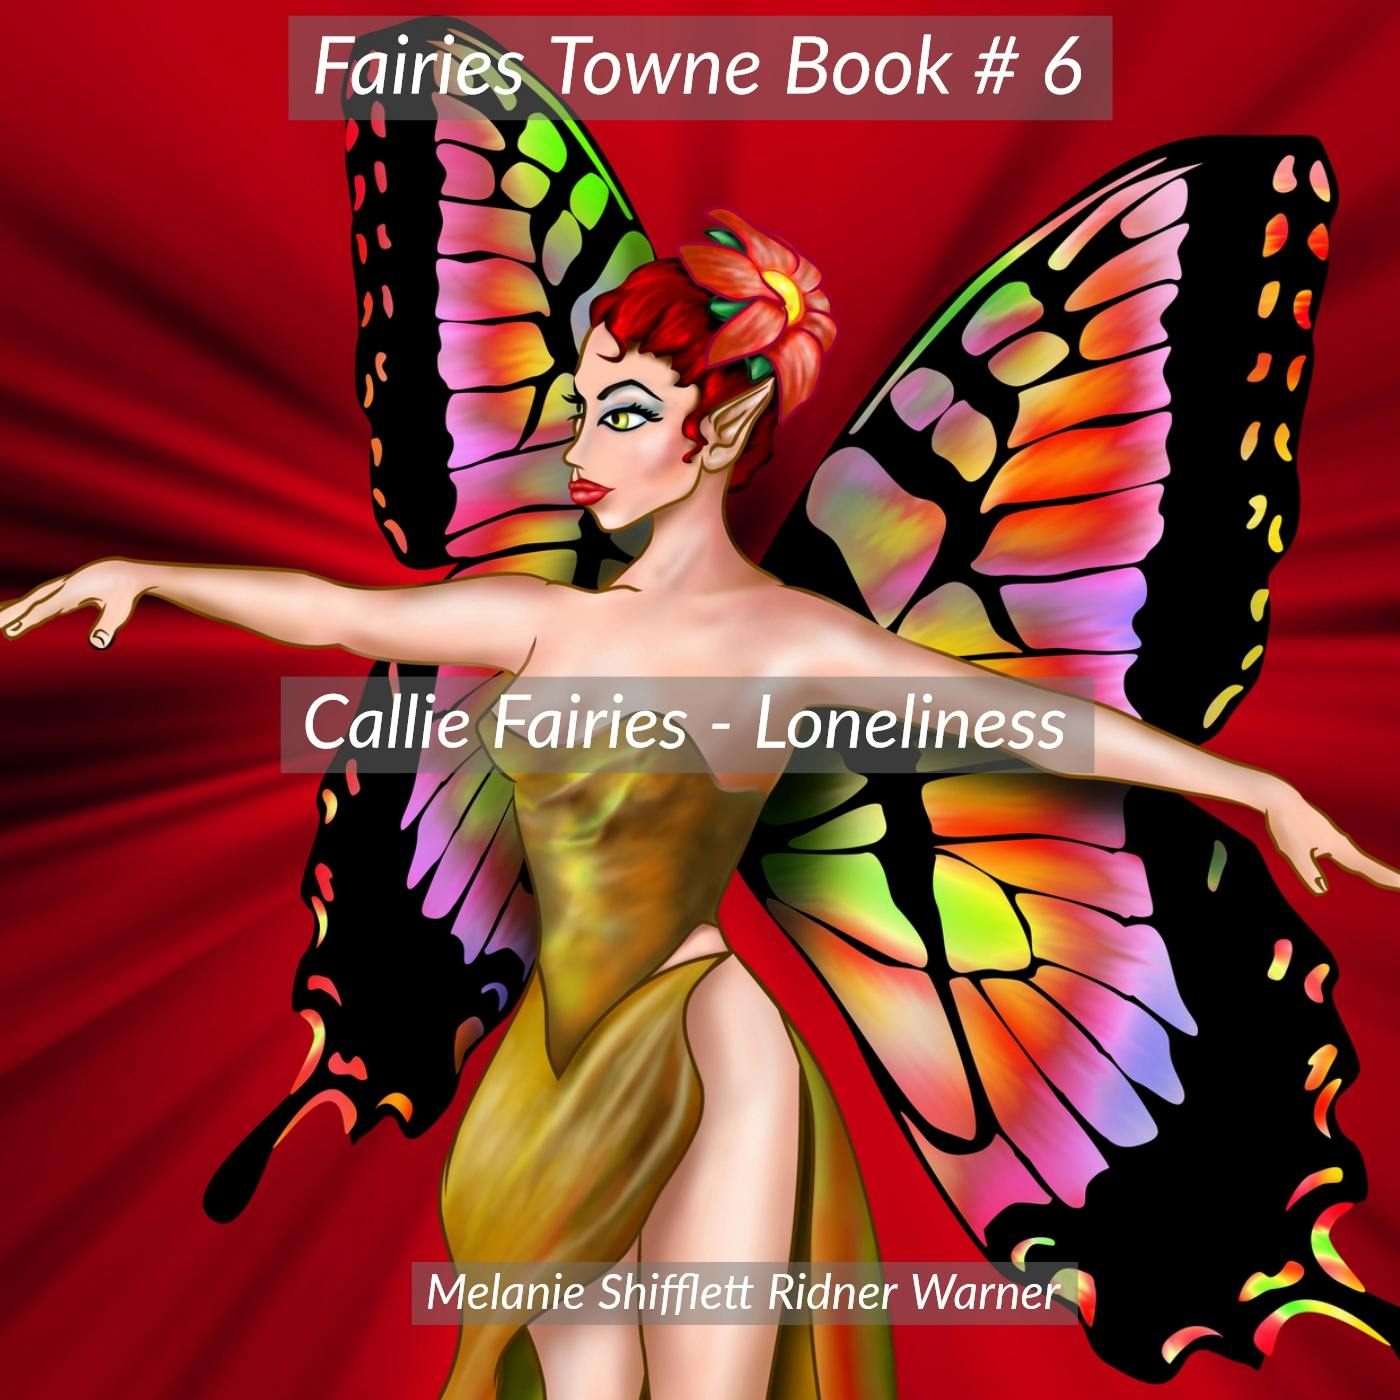 Callie Fairies: Loneliness - undefined